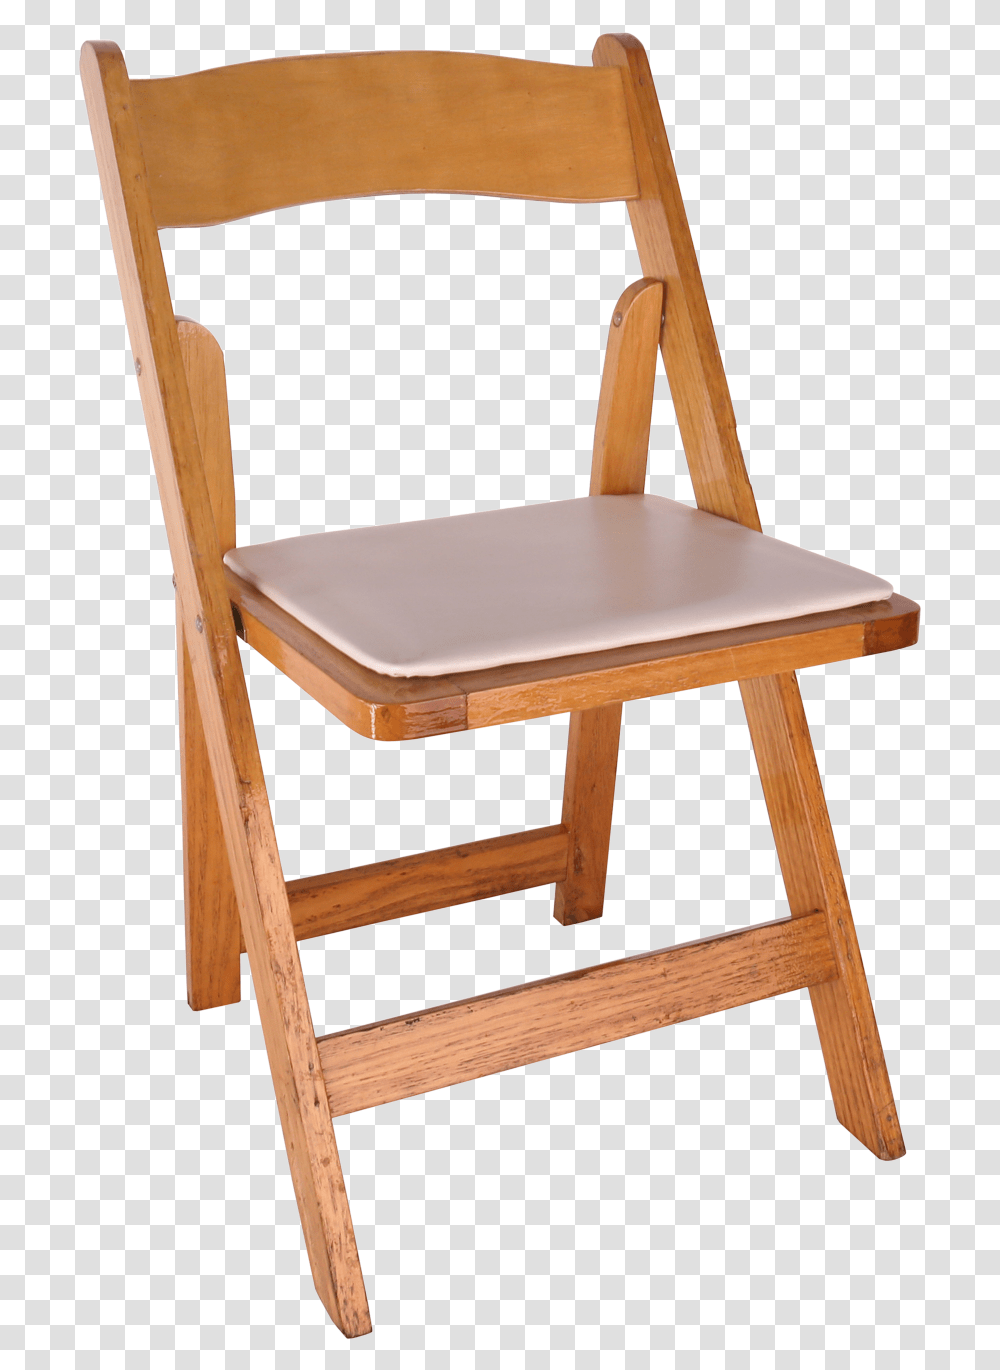 Chair Natural Oak Wood Folding Chair With Padded Seat Wooden Chair Folding Chair, Furniture Transparent Png